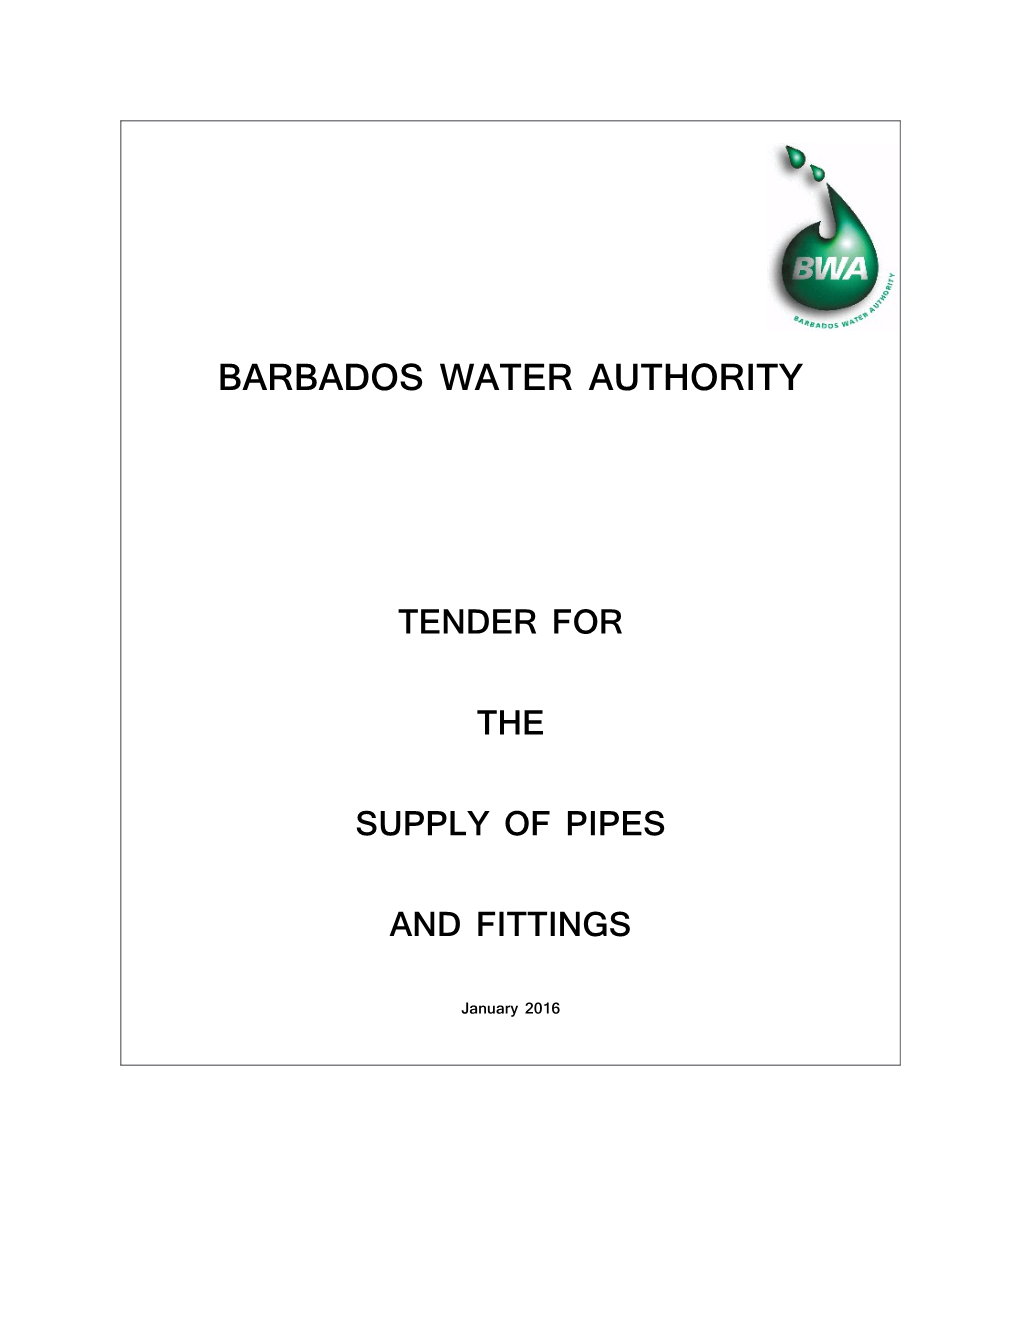 Barbados Water Authority